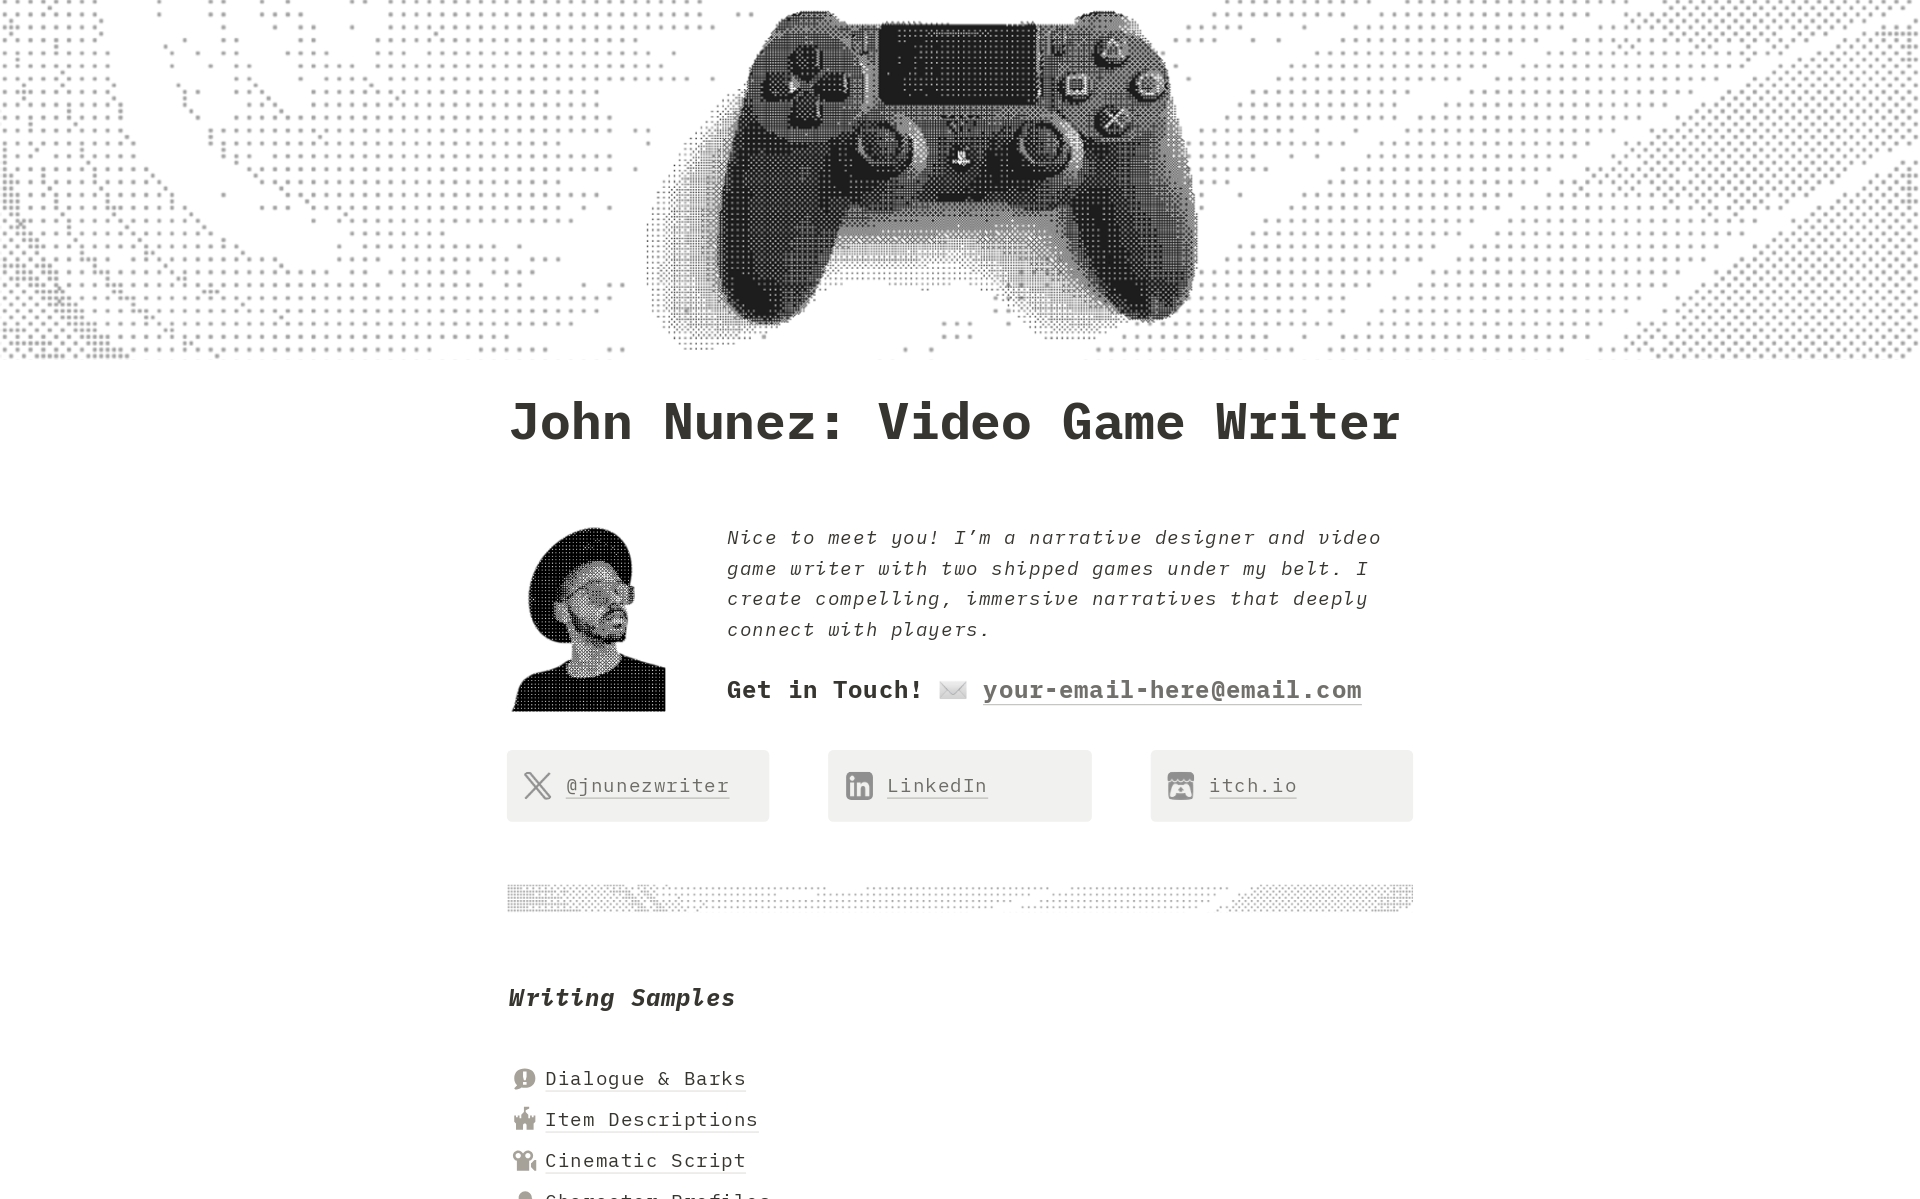 Get your writing portfolio online fast with this Notion site template. The Game Writer portfolio makes it easy to create a clean, professional-looking website to show off your writing samples and experience. No coding needed! 